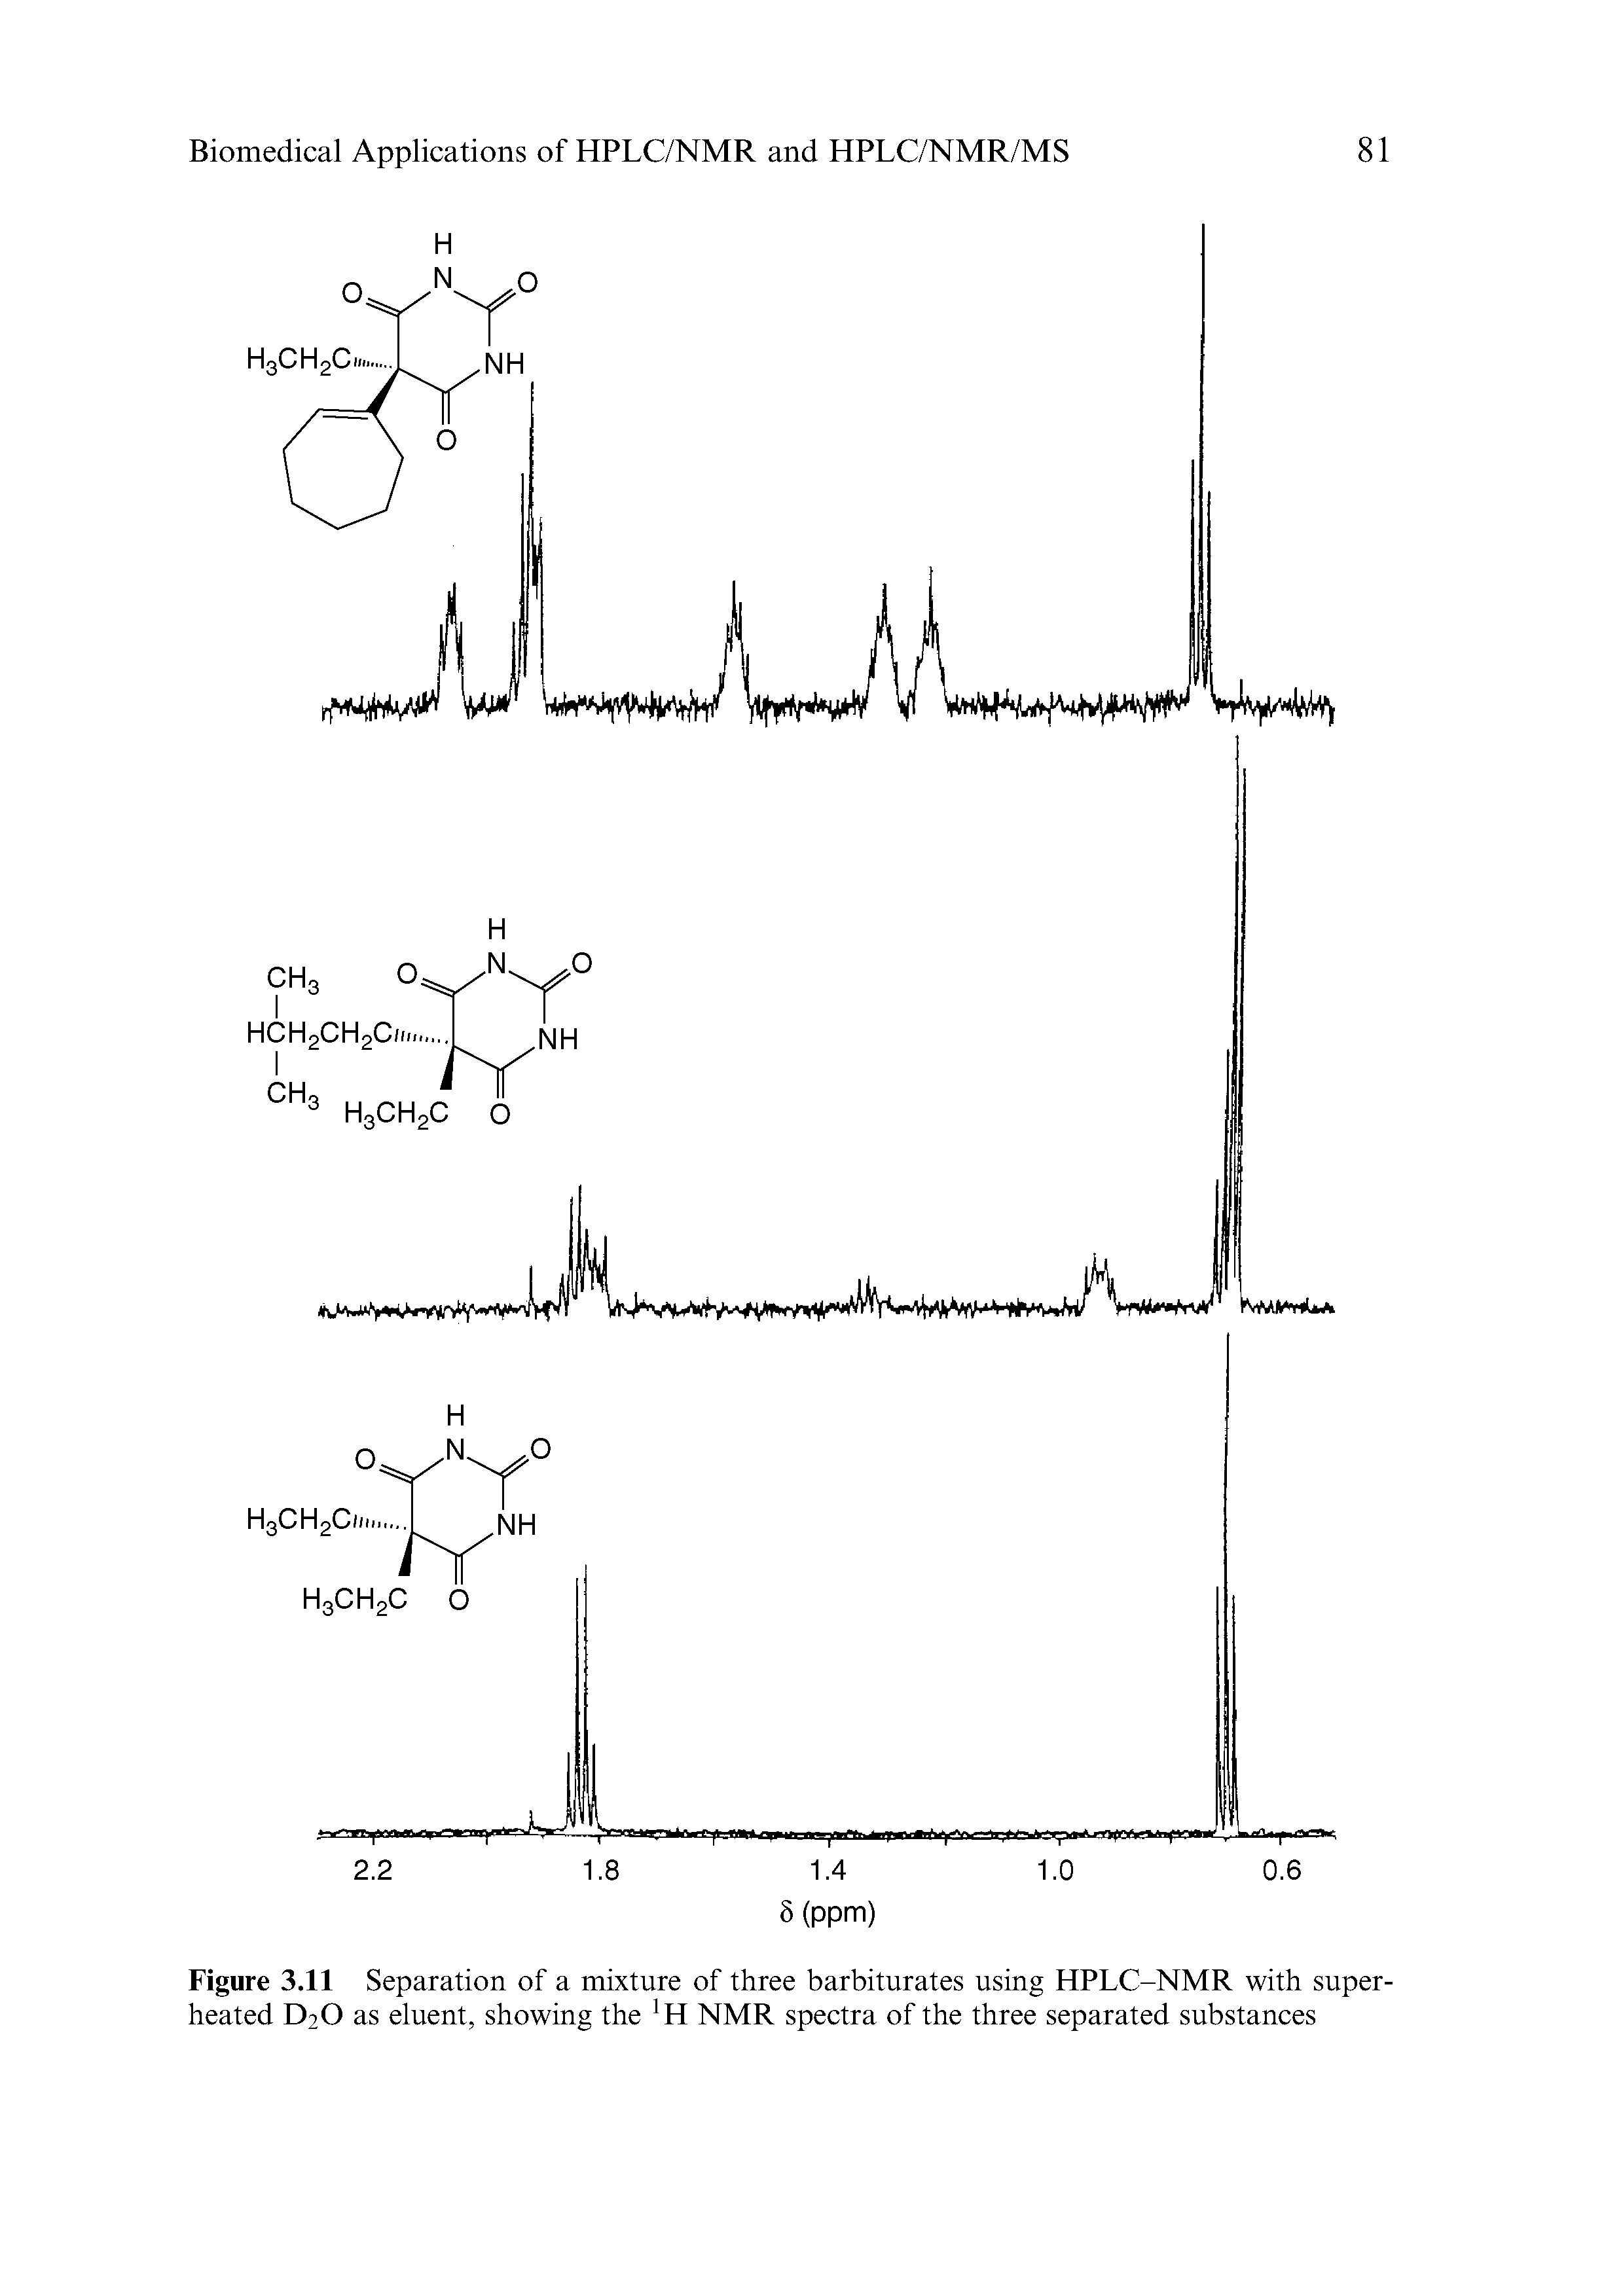 Figure 3.11 Separation of a mixture of three barbiturates using HPLC-NMR with superheated D2O as eluent, showing the 1 H NMR spectra of the three separated substances...